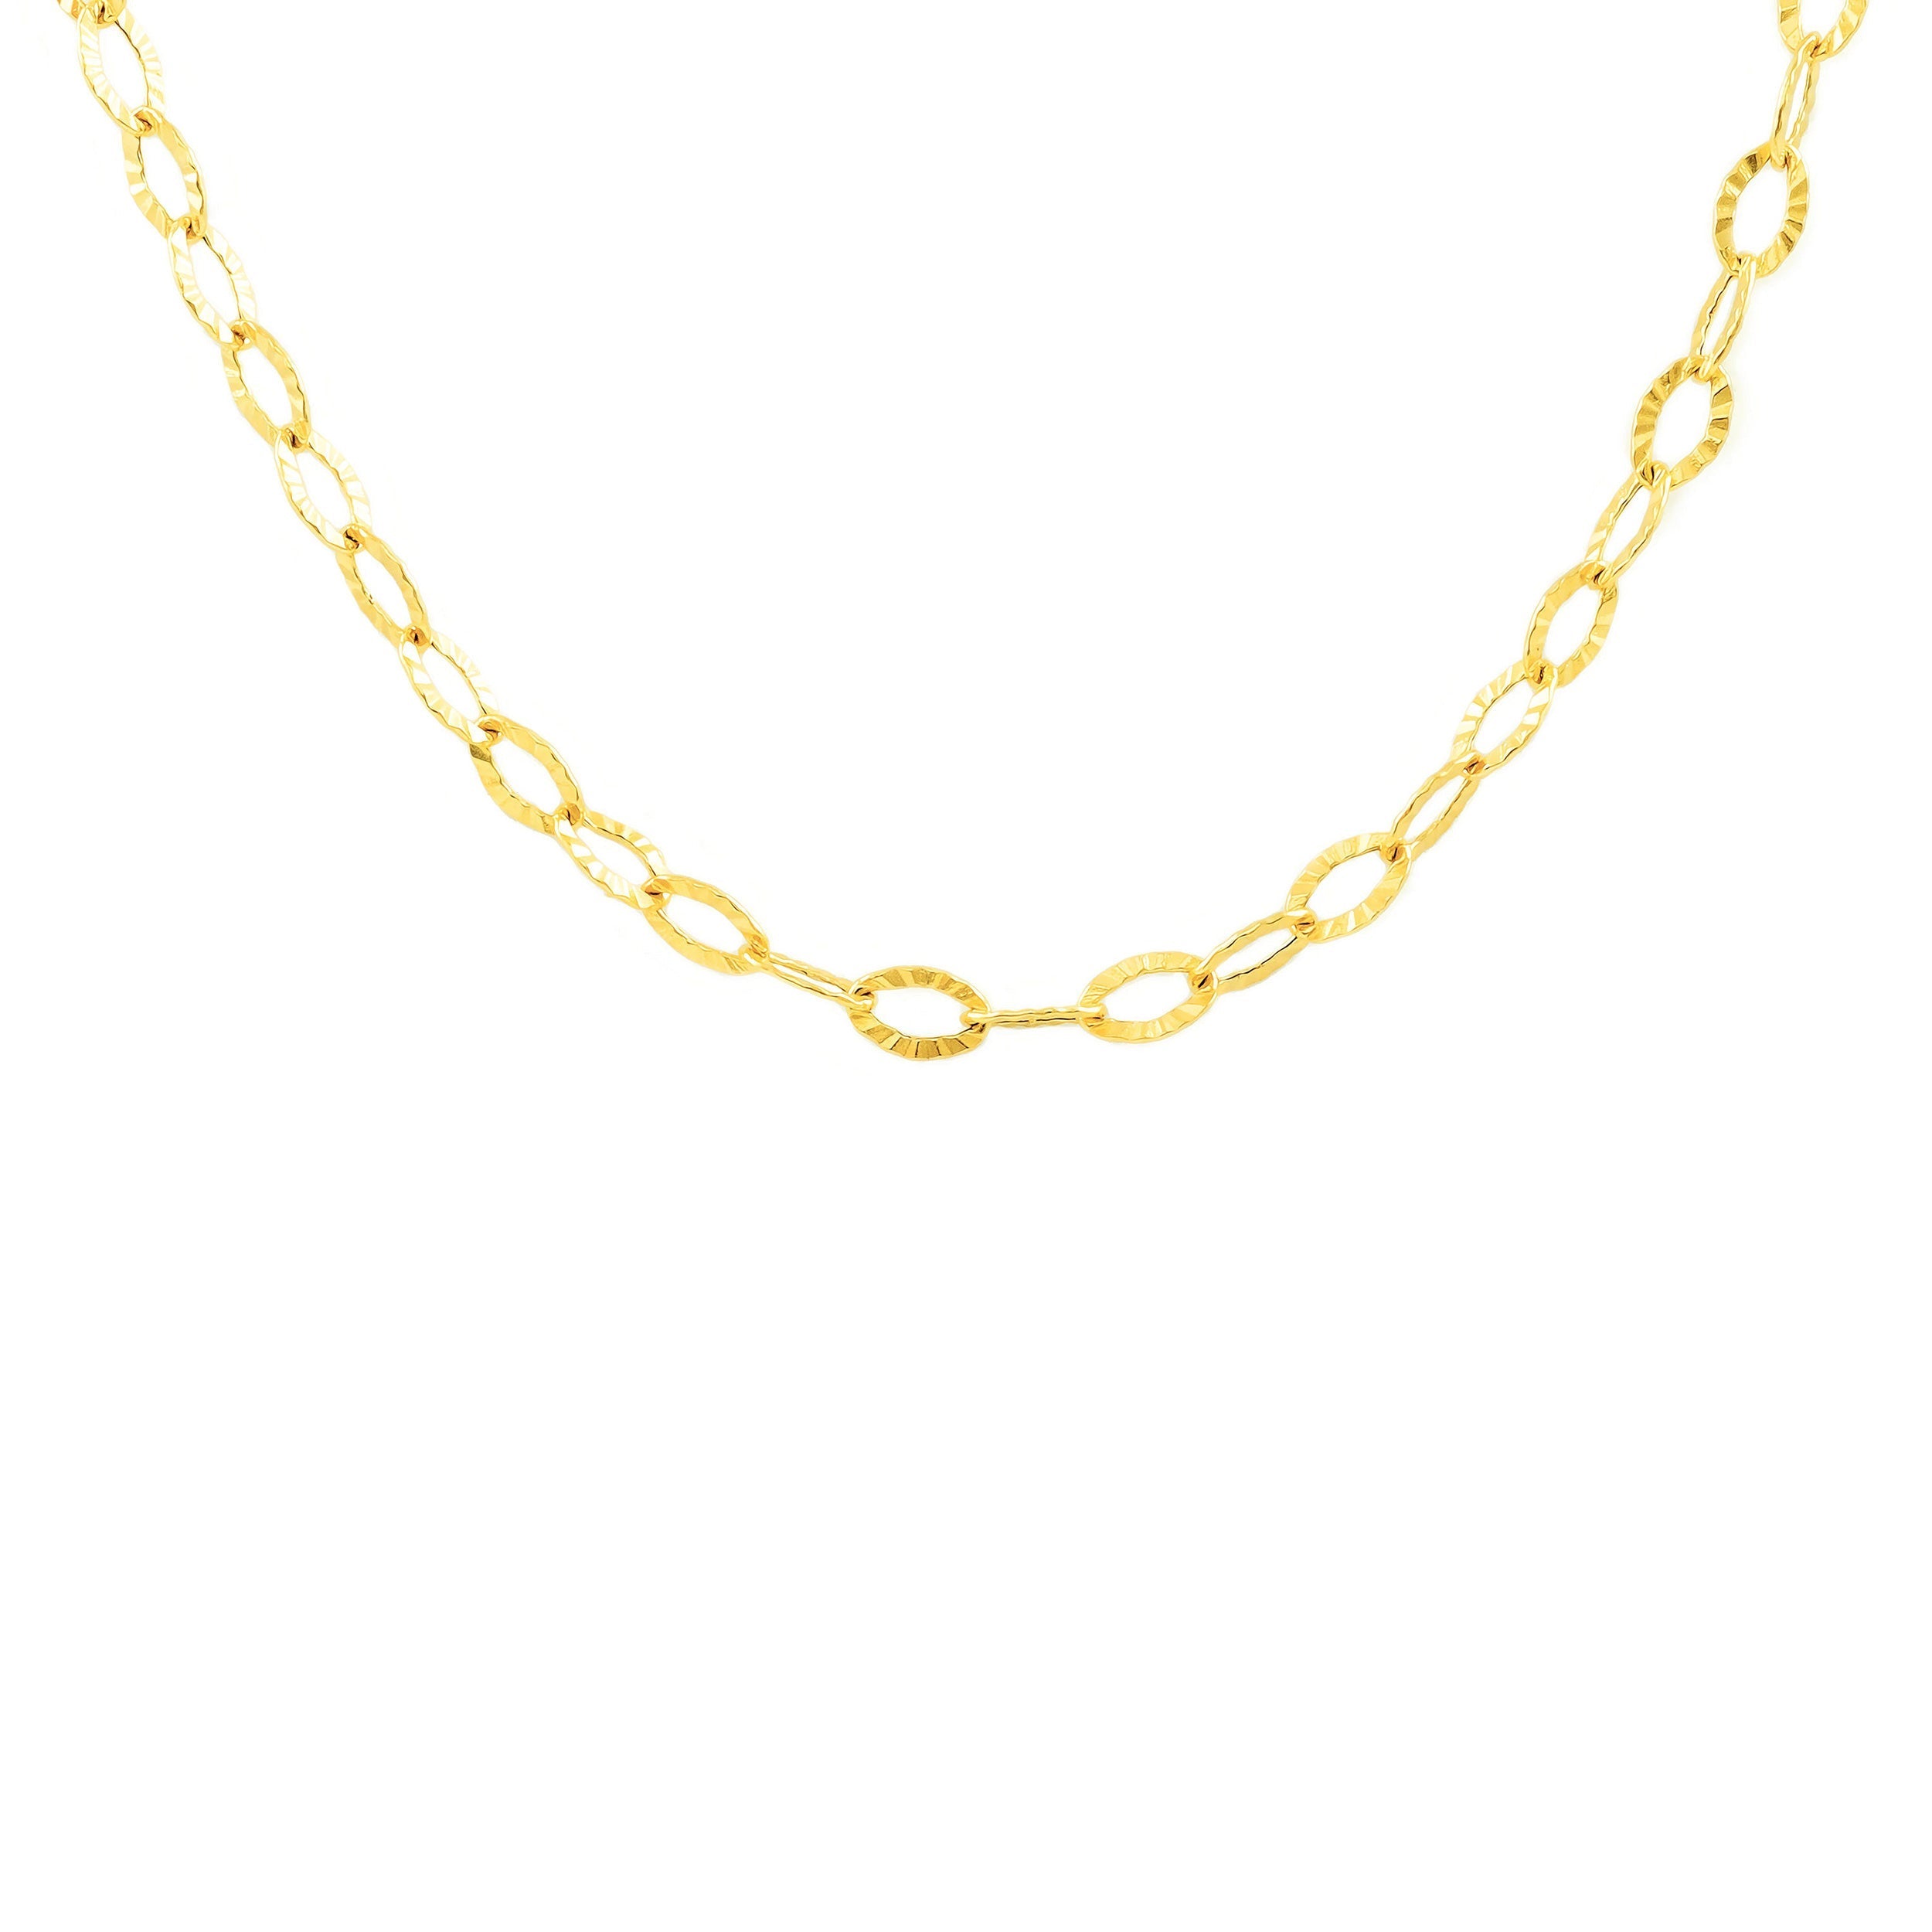 18K Yellow Gold Chain Fantasy link texture